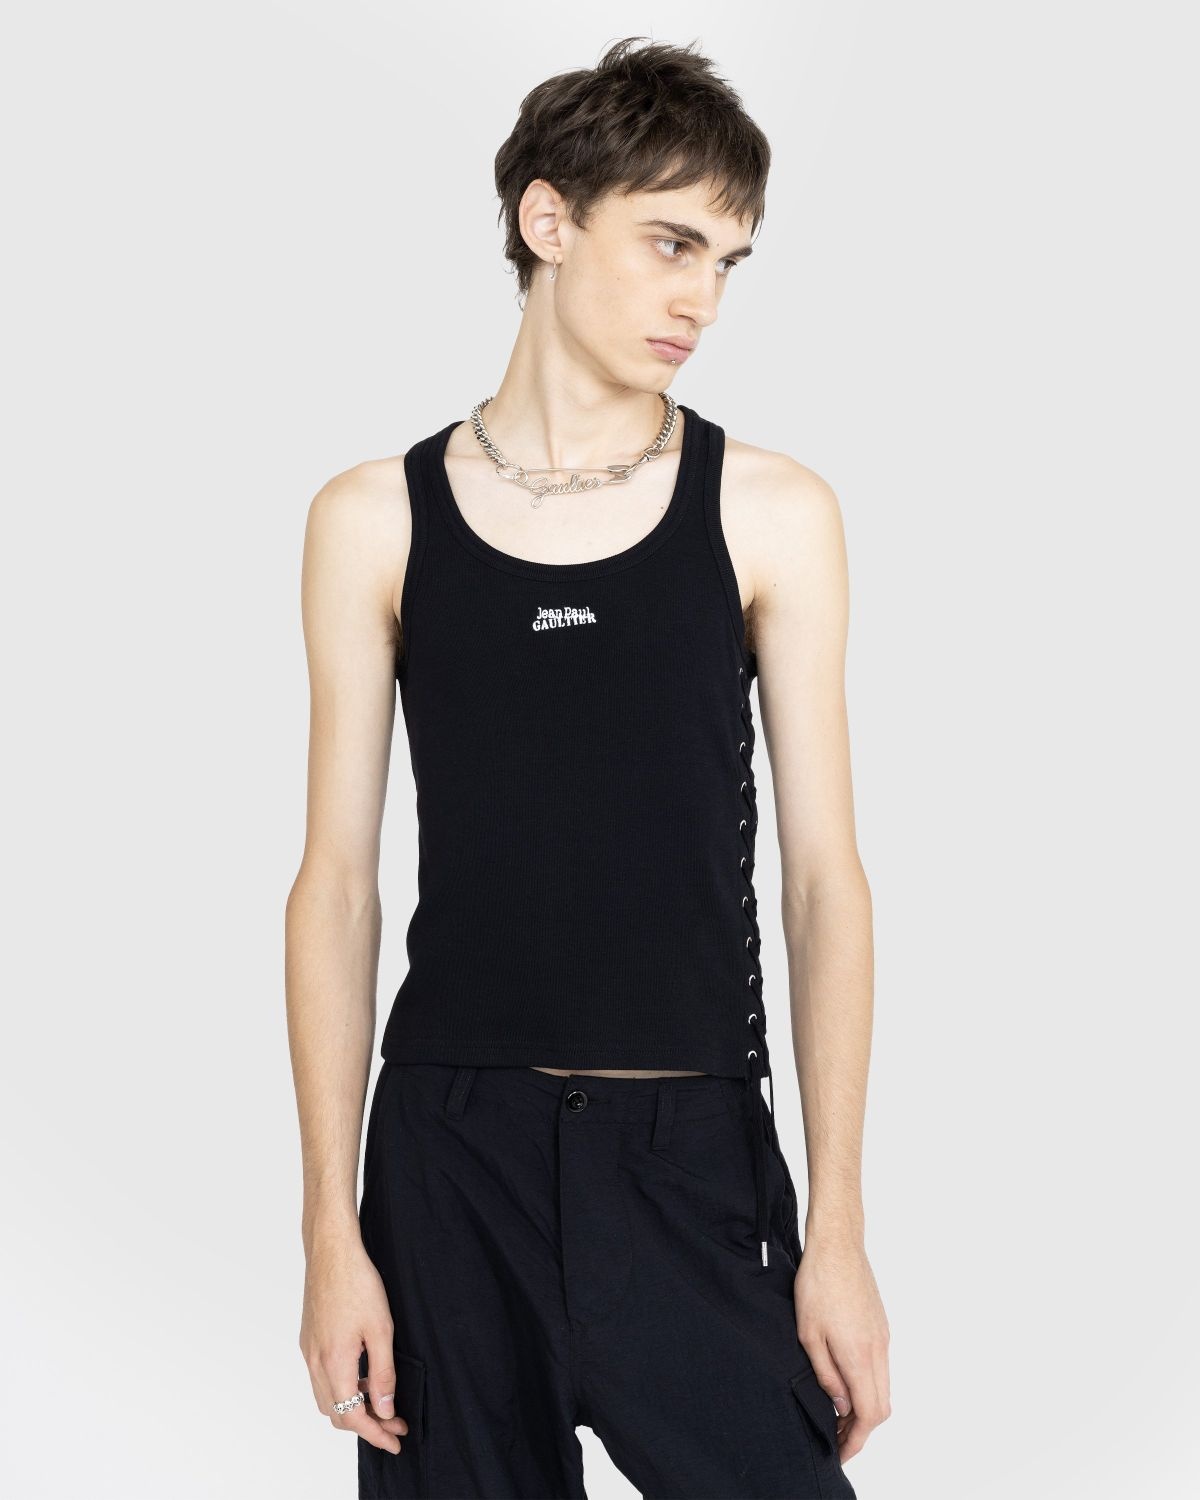 Jean Paul Gaultier – Tanktop With Laced Side Details Black - 2